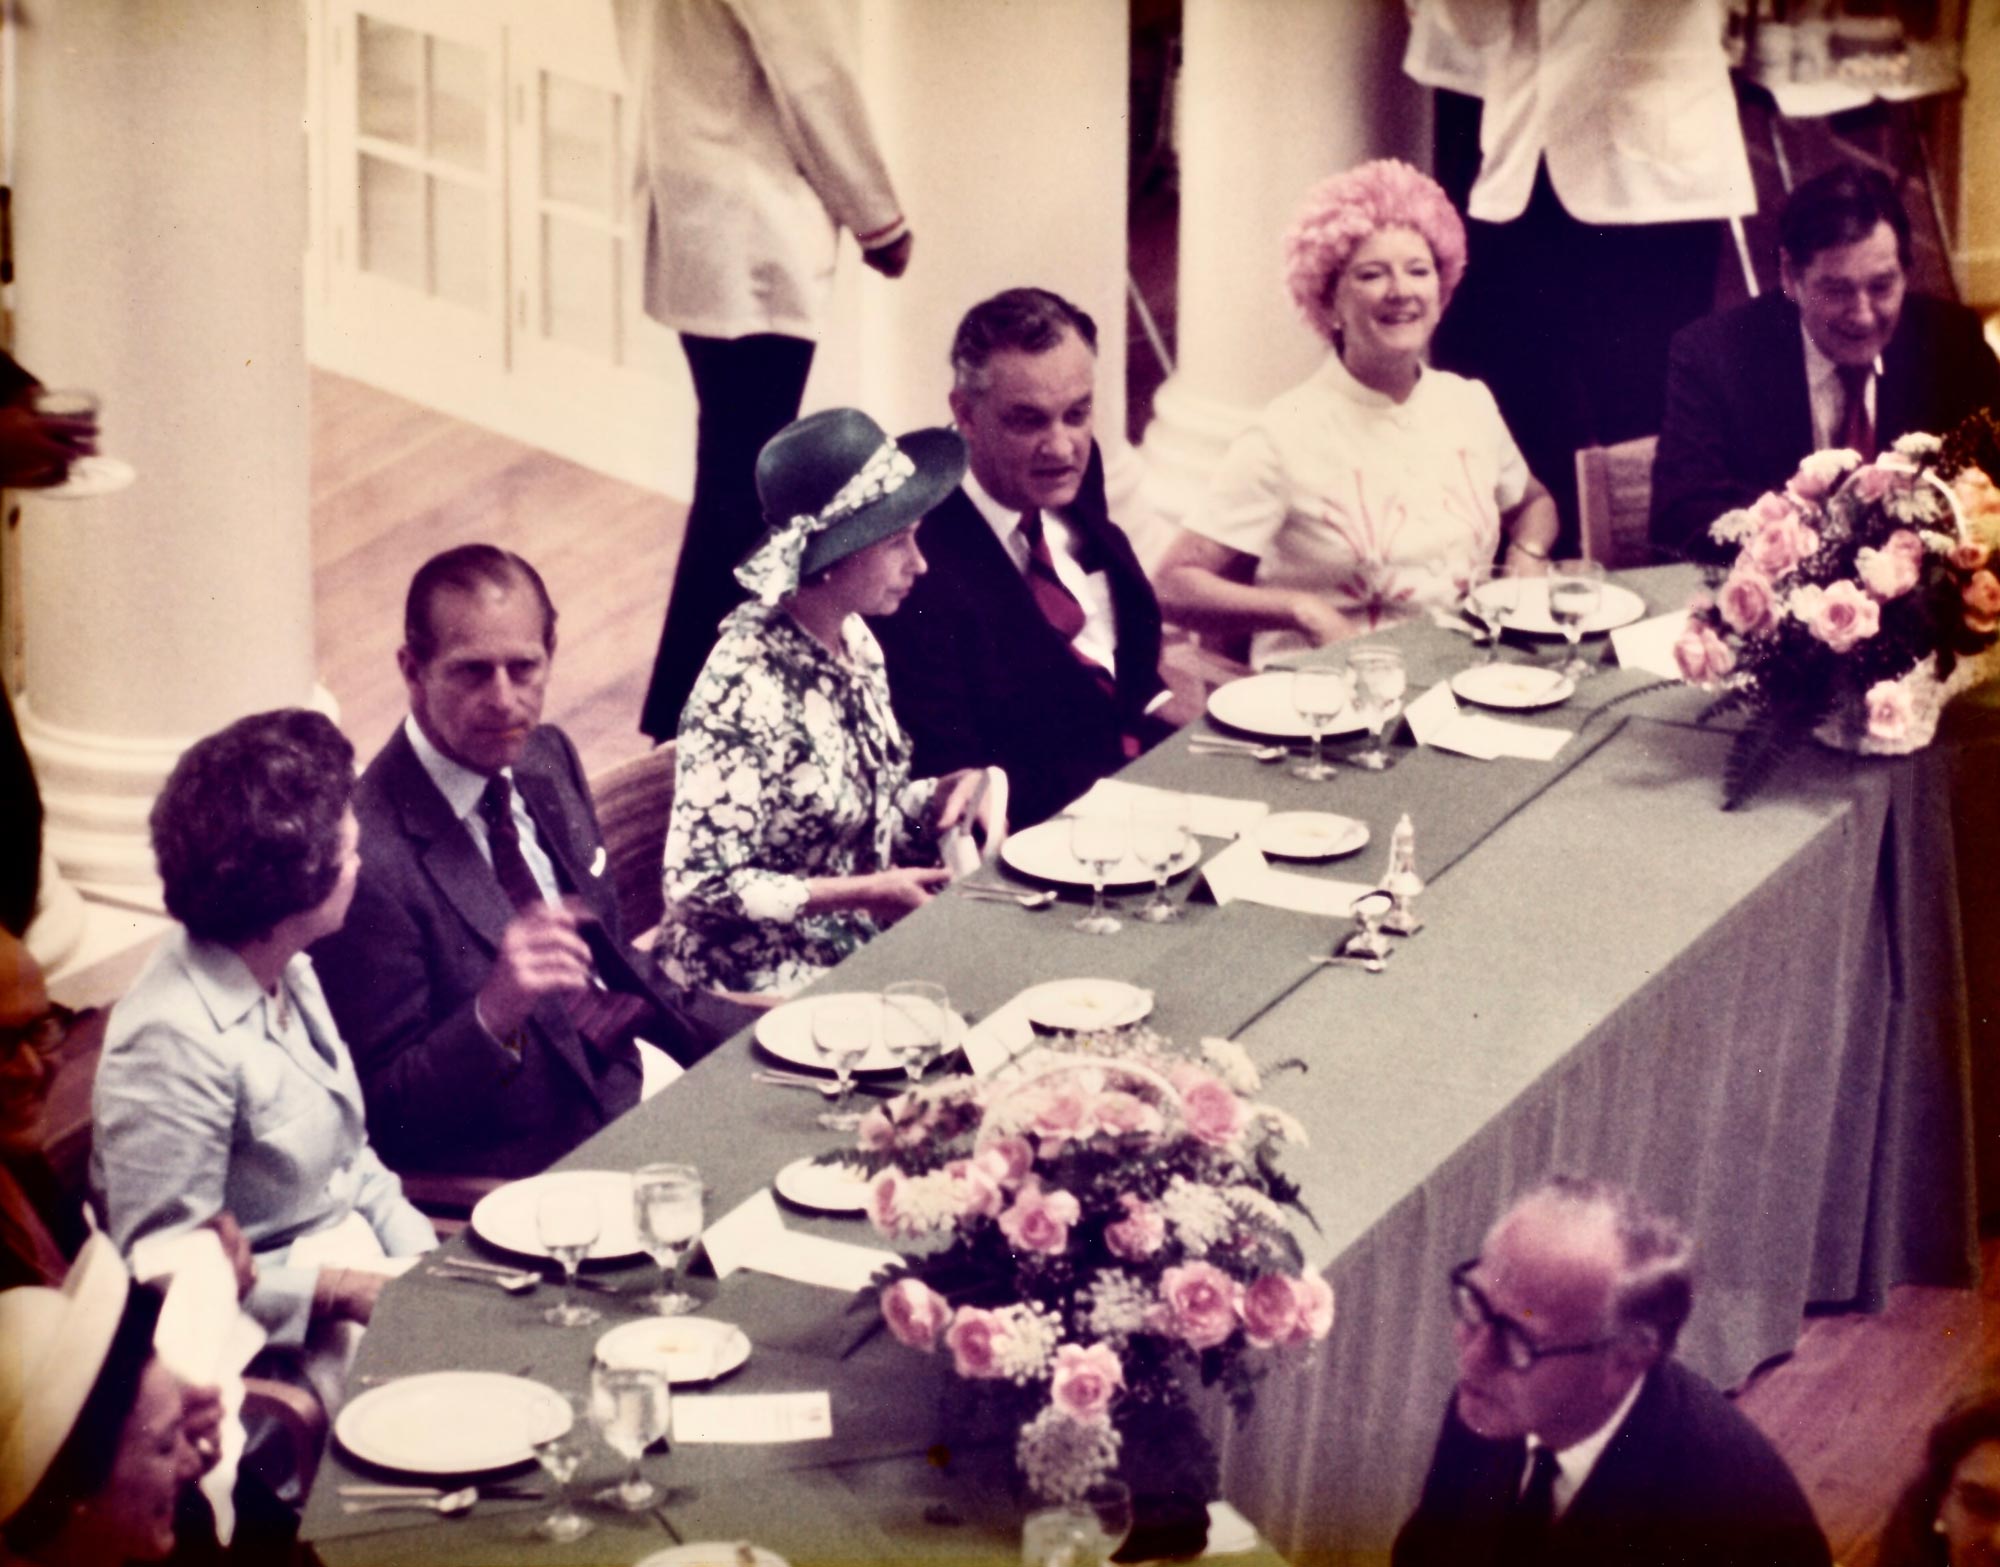 Queen Elizabeth sits at a banquet table with several other people chatting